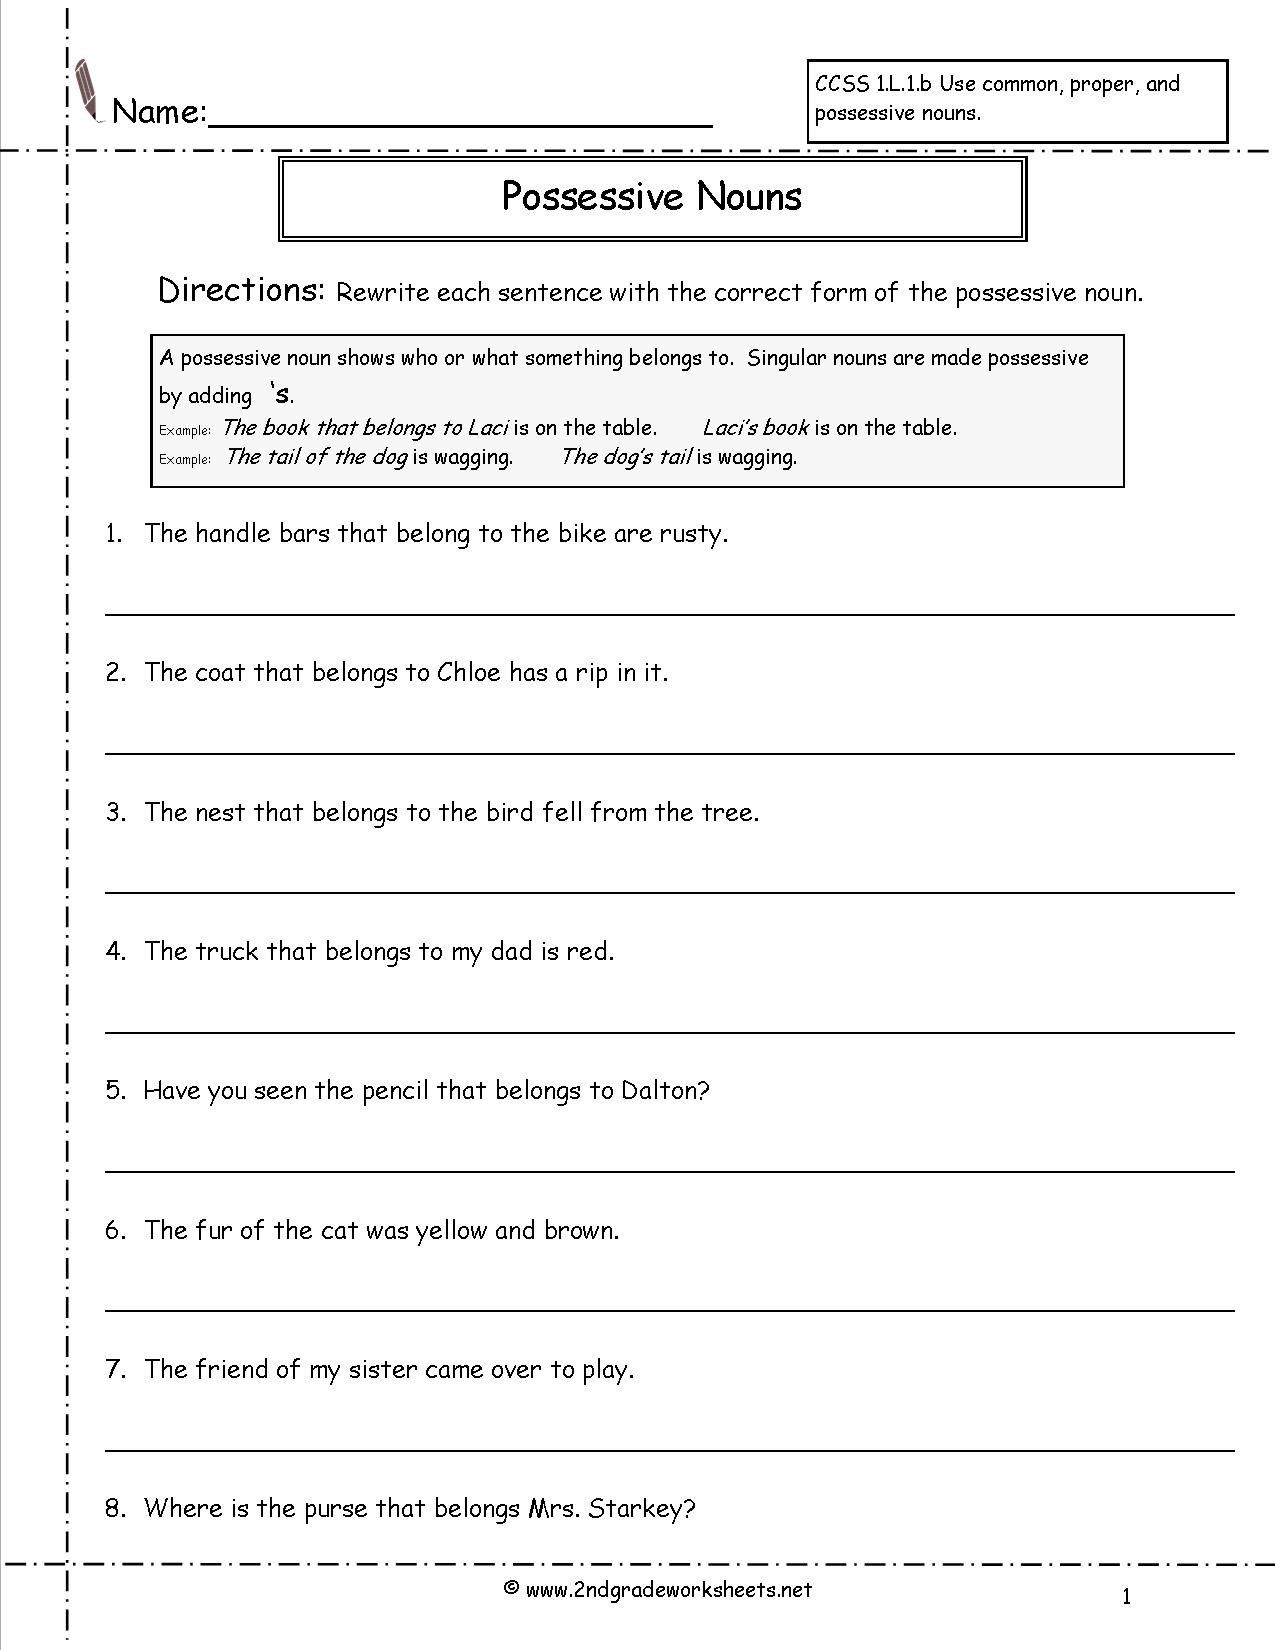 18-best-images-of-possessive-nouns-printable-worksheets-plural-possessive-nouns-worksheets